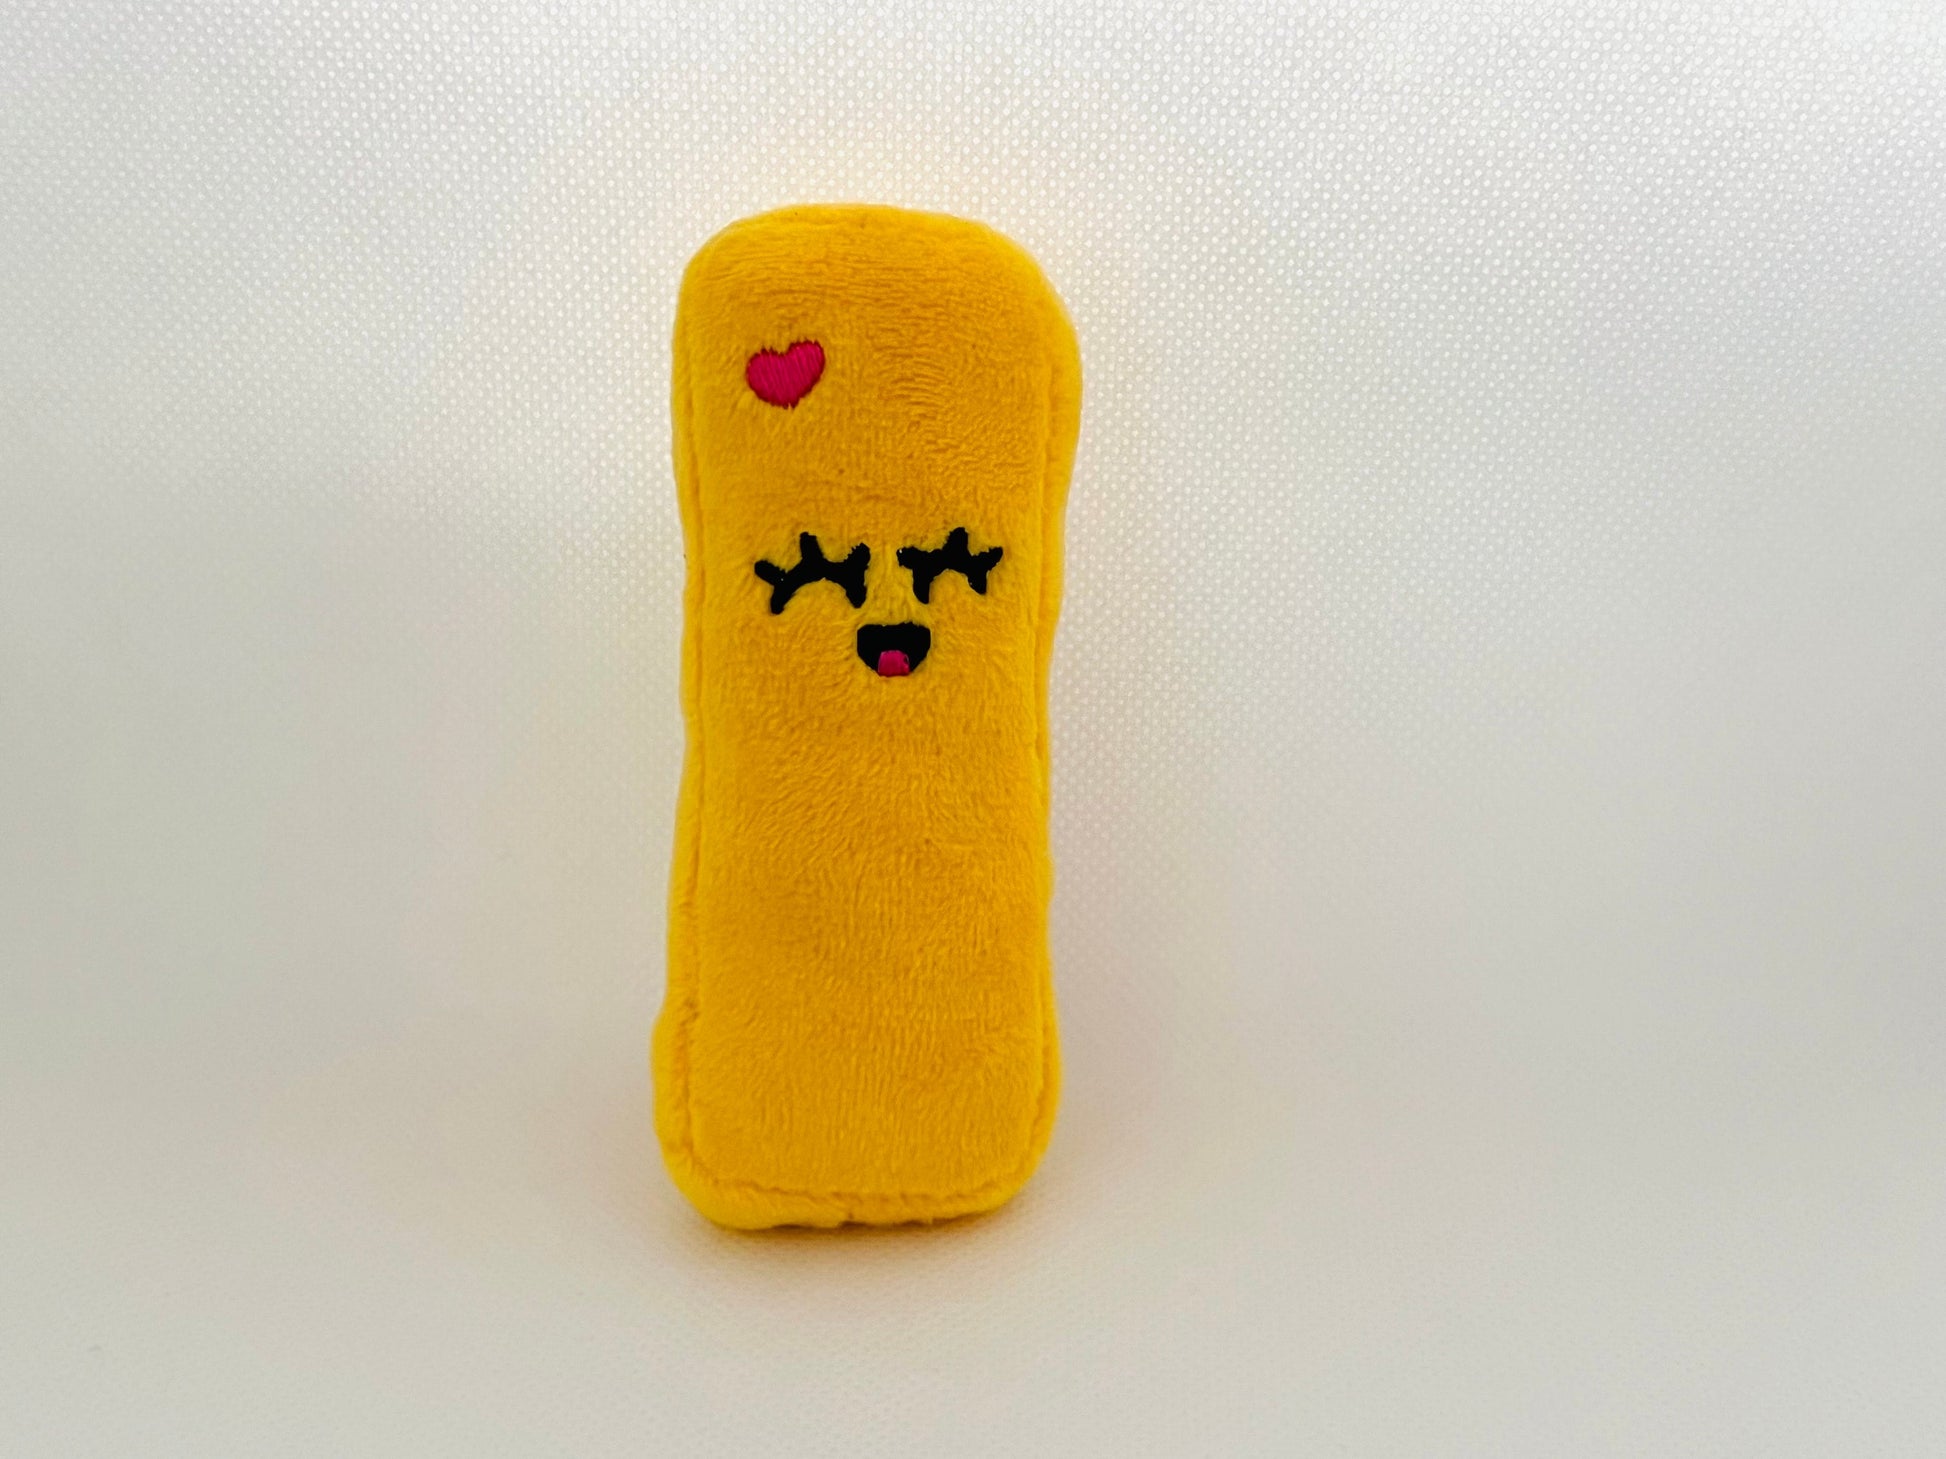 French Fry Plush Keychain designed by me